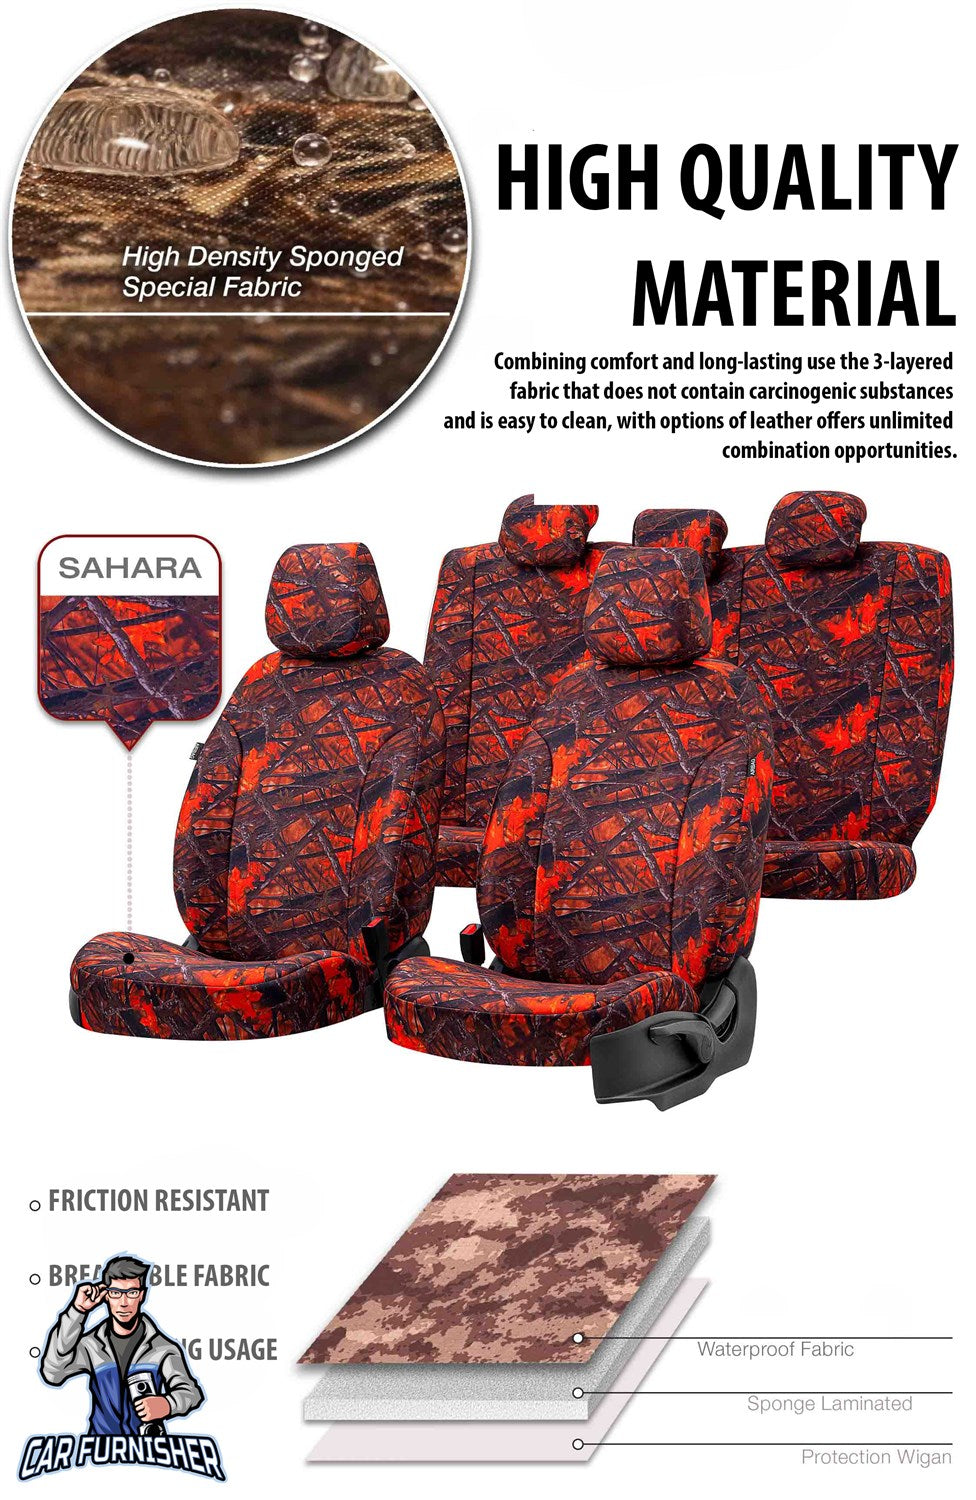 Bmw 2 Series Seat Cover Camouflage Waterproof Design Thar Camo Waterproof Fabric